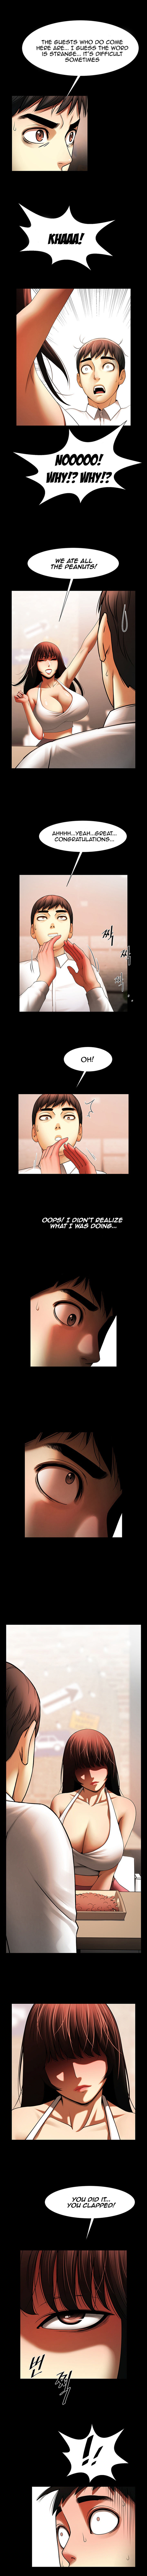 The Woman Who Lives In My Room - Chapter 18 Page 4